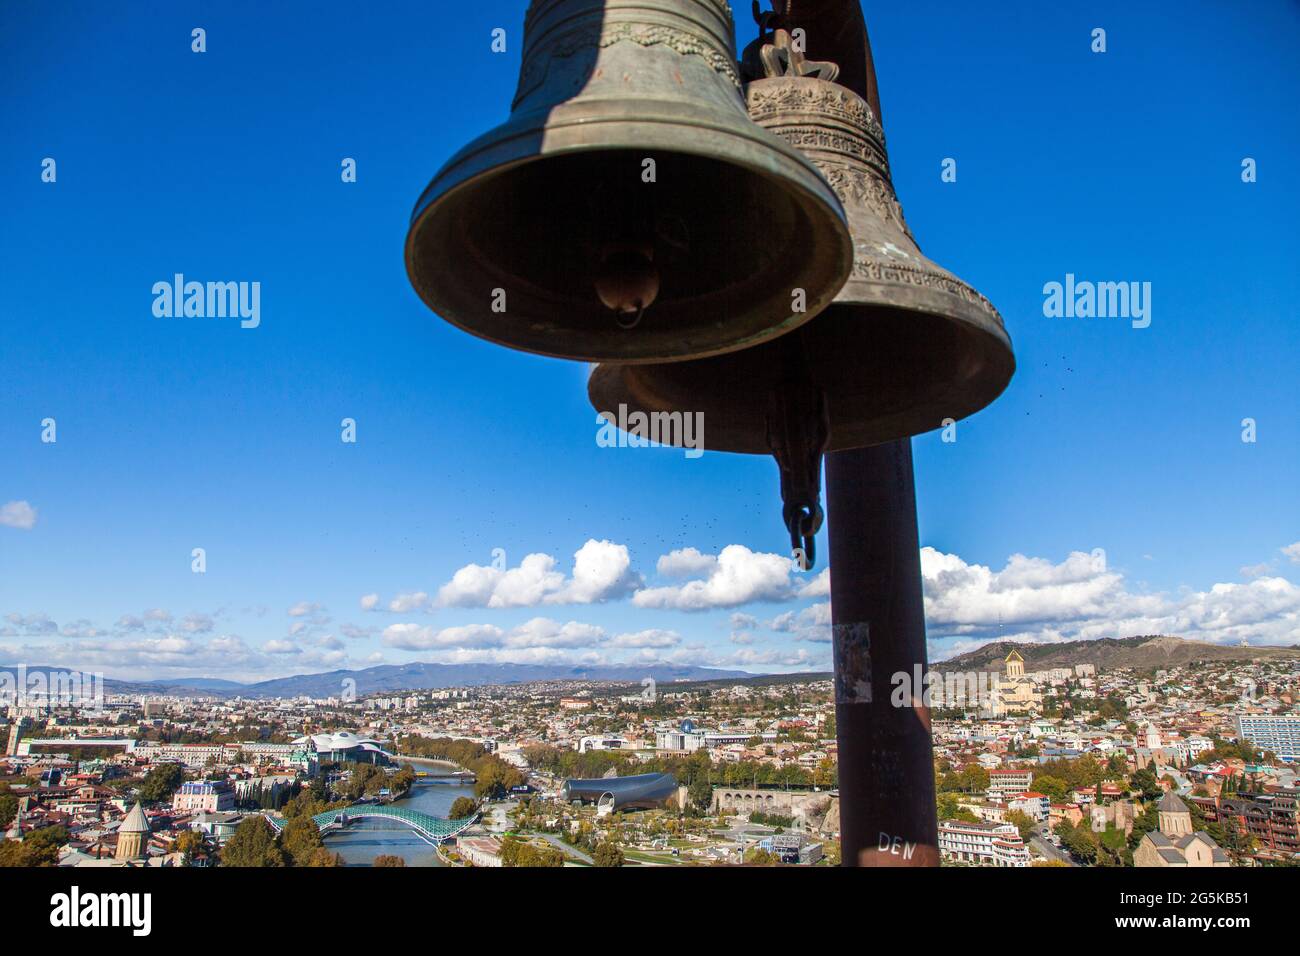 Tbilisi cityscape with church bells Stock Photo